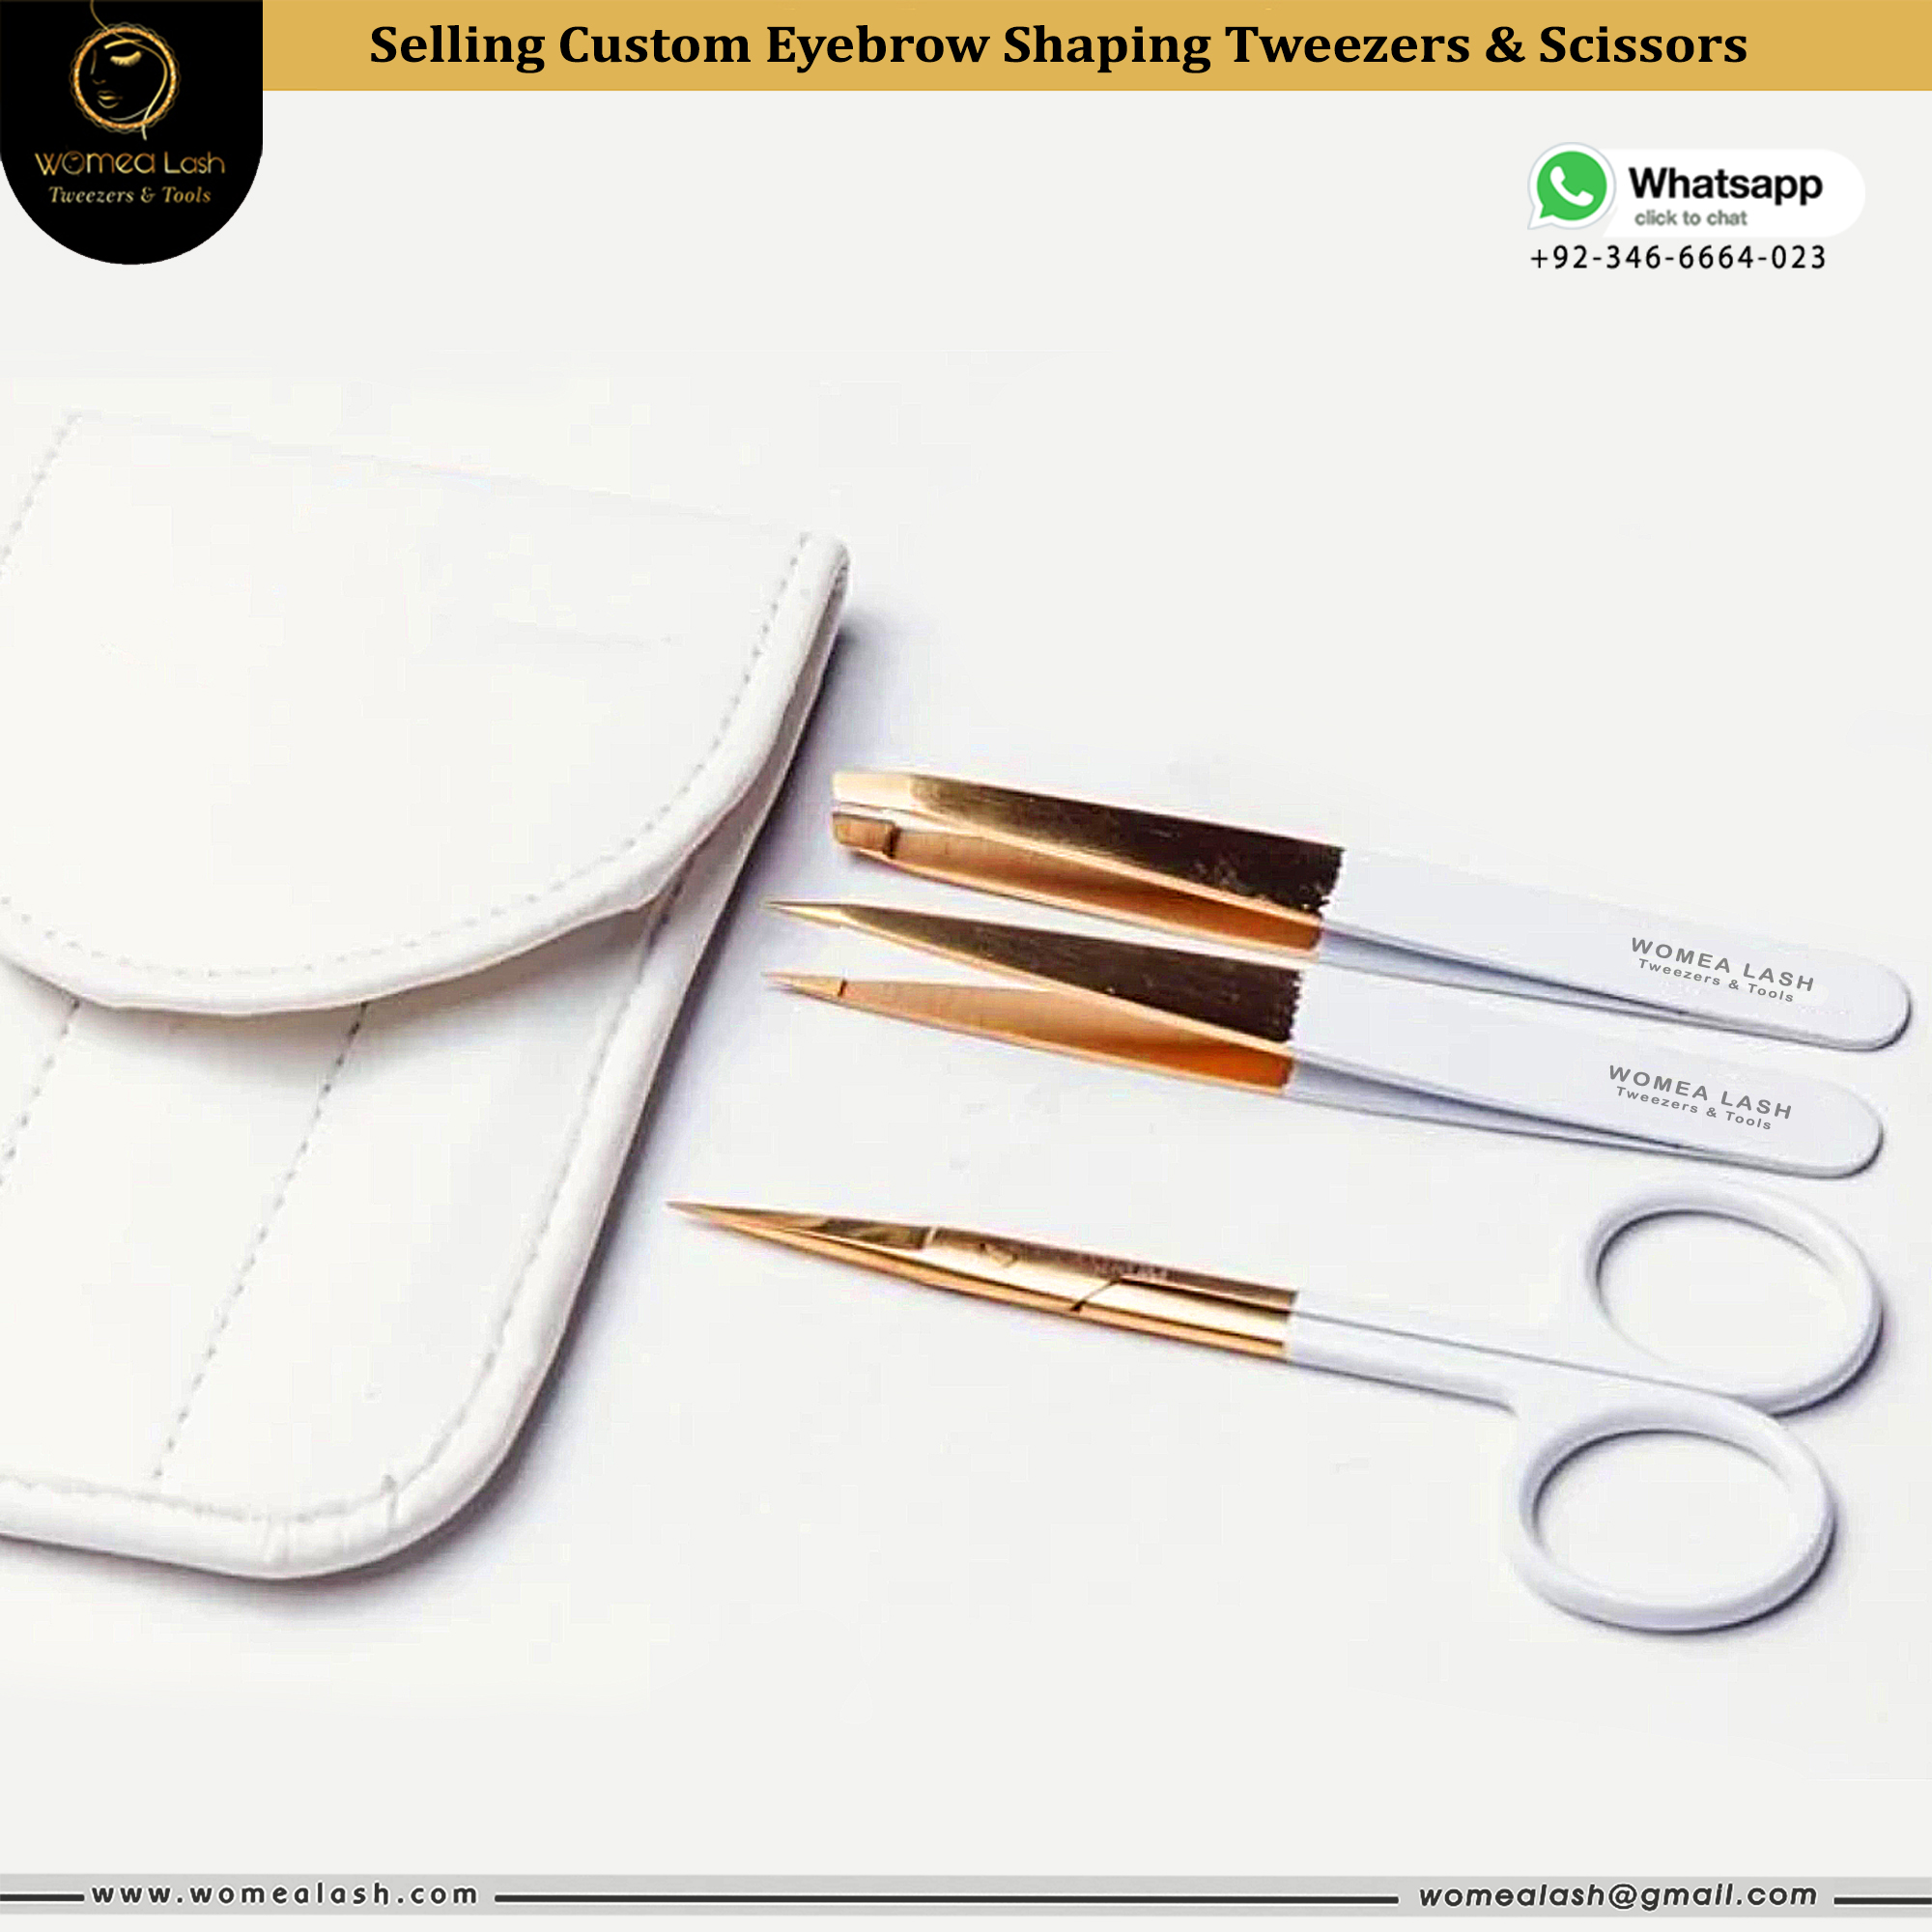 Selling Custom White & Gold Eyebrow Tweezers & Scissors Say Goodbye to all your Messy Facial Hair Game Strong with our 3-piece set for Grooming those Brows to Perfection. 